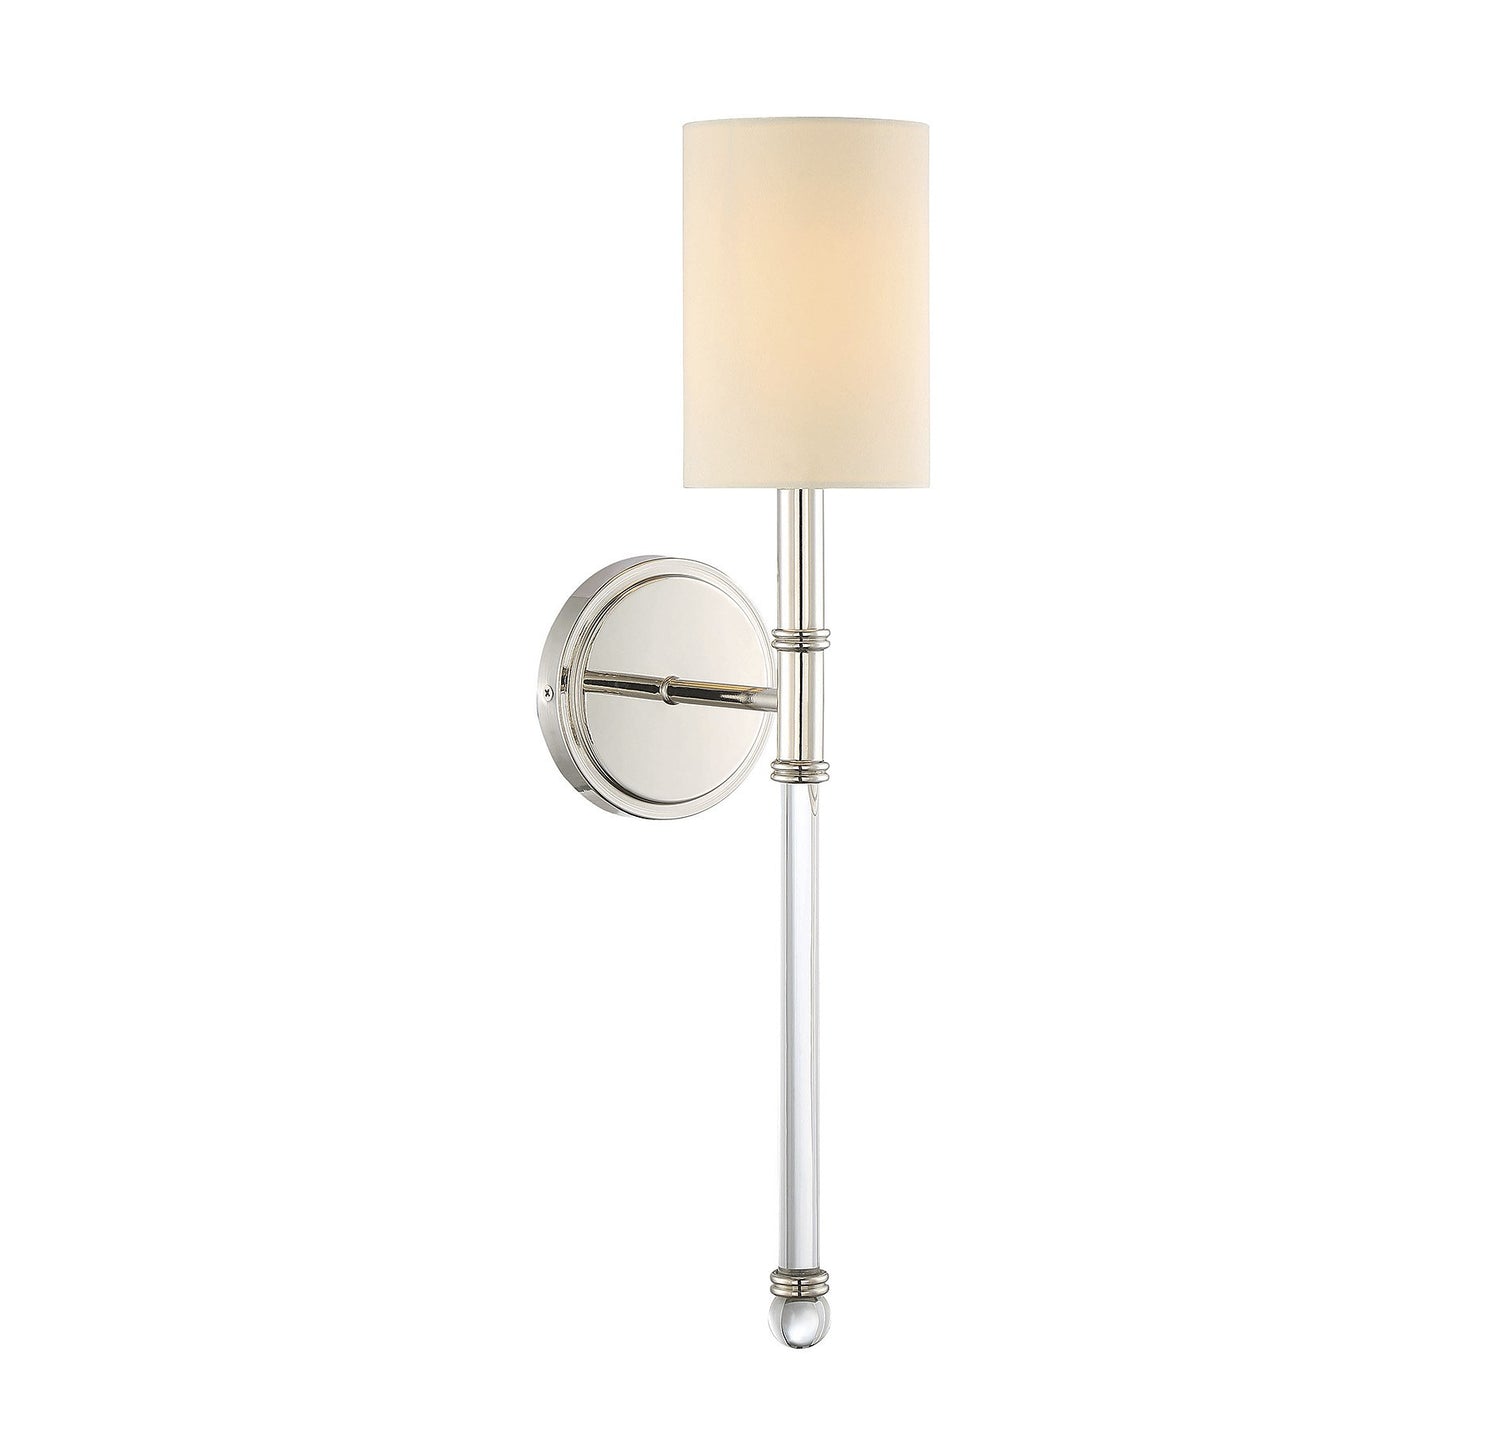 Savoy House Fremont 1 Light Wall Sconce in Polished Nickel and Soft White Fabric Shade 9-101-1-109